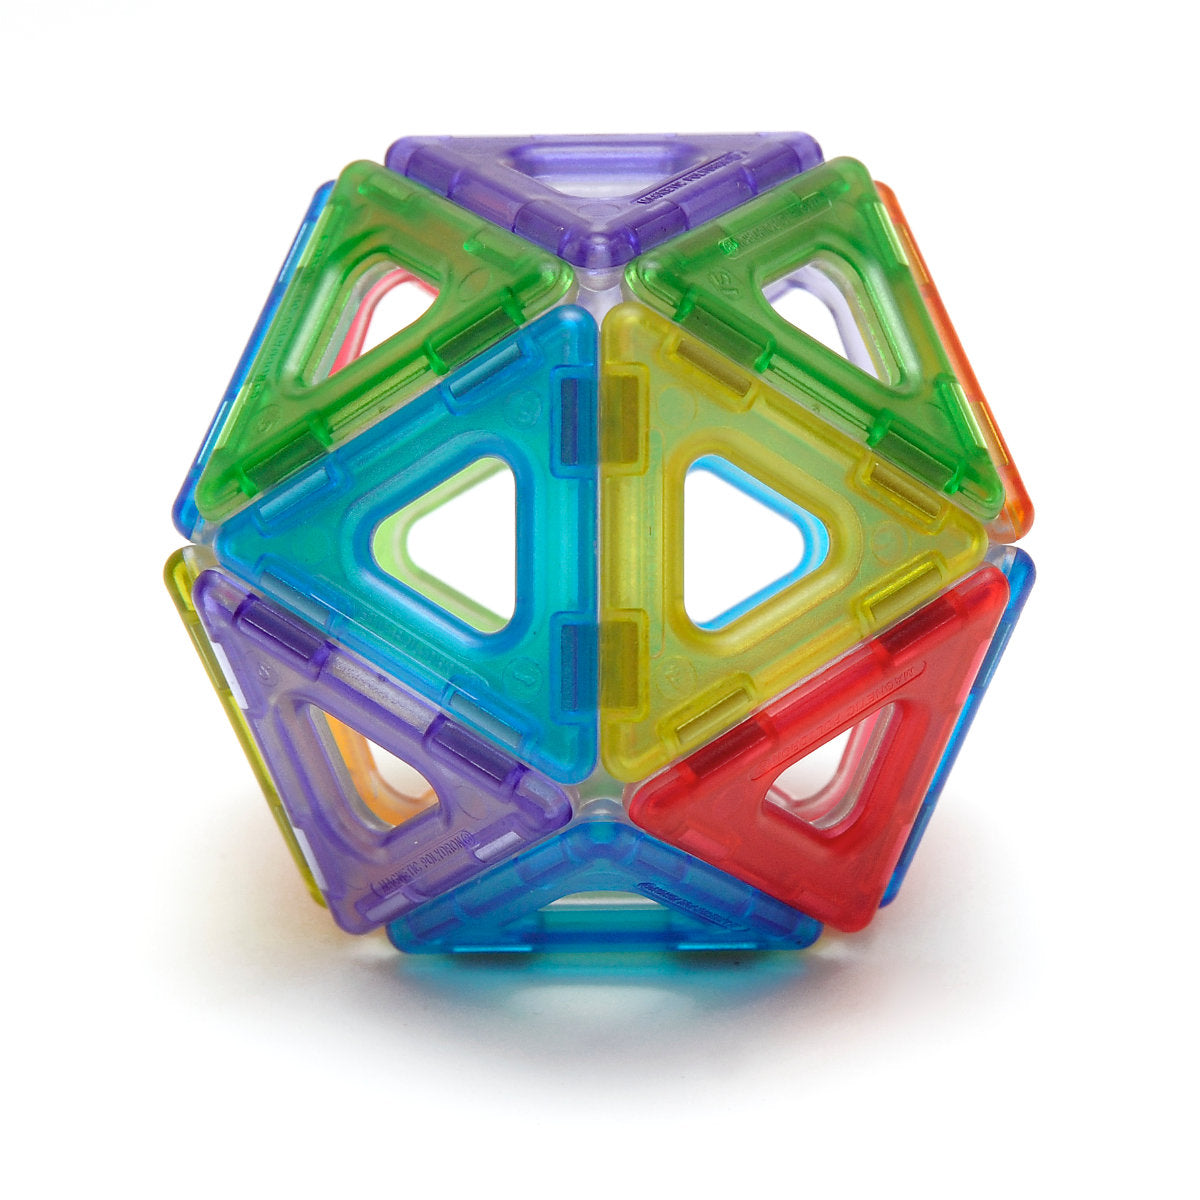 Translucent Magnetic Polydron Set, Unlock a world of creativity and exploration with the Translucent Magnetic Polydron Set. This set is designed to inspire children to create stunning 2D and 3D shapes on a lightbox, providing a mesmerizing visual experience.With 64 pieces, including 24 squares and 40 equilateral triangles, this set offers endless possibilities for building and construction. The included poster serves as a helpful guide, sparking ideas and initiating play.Crafted from super tough, engineerin